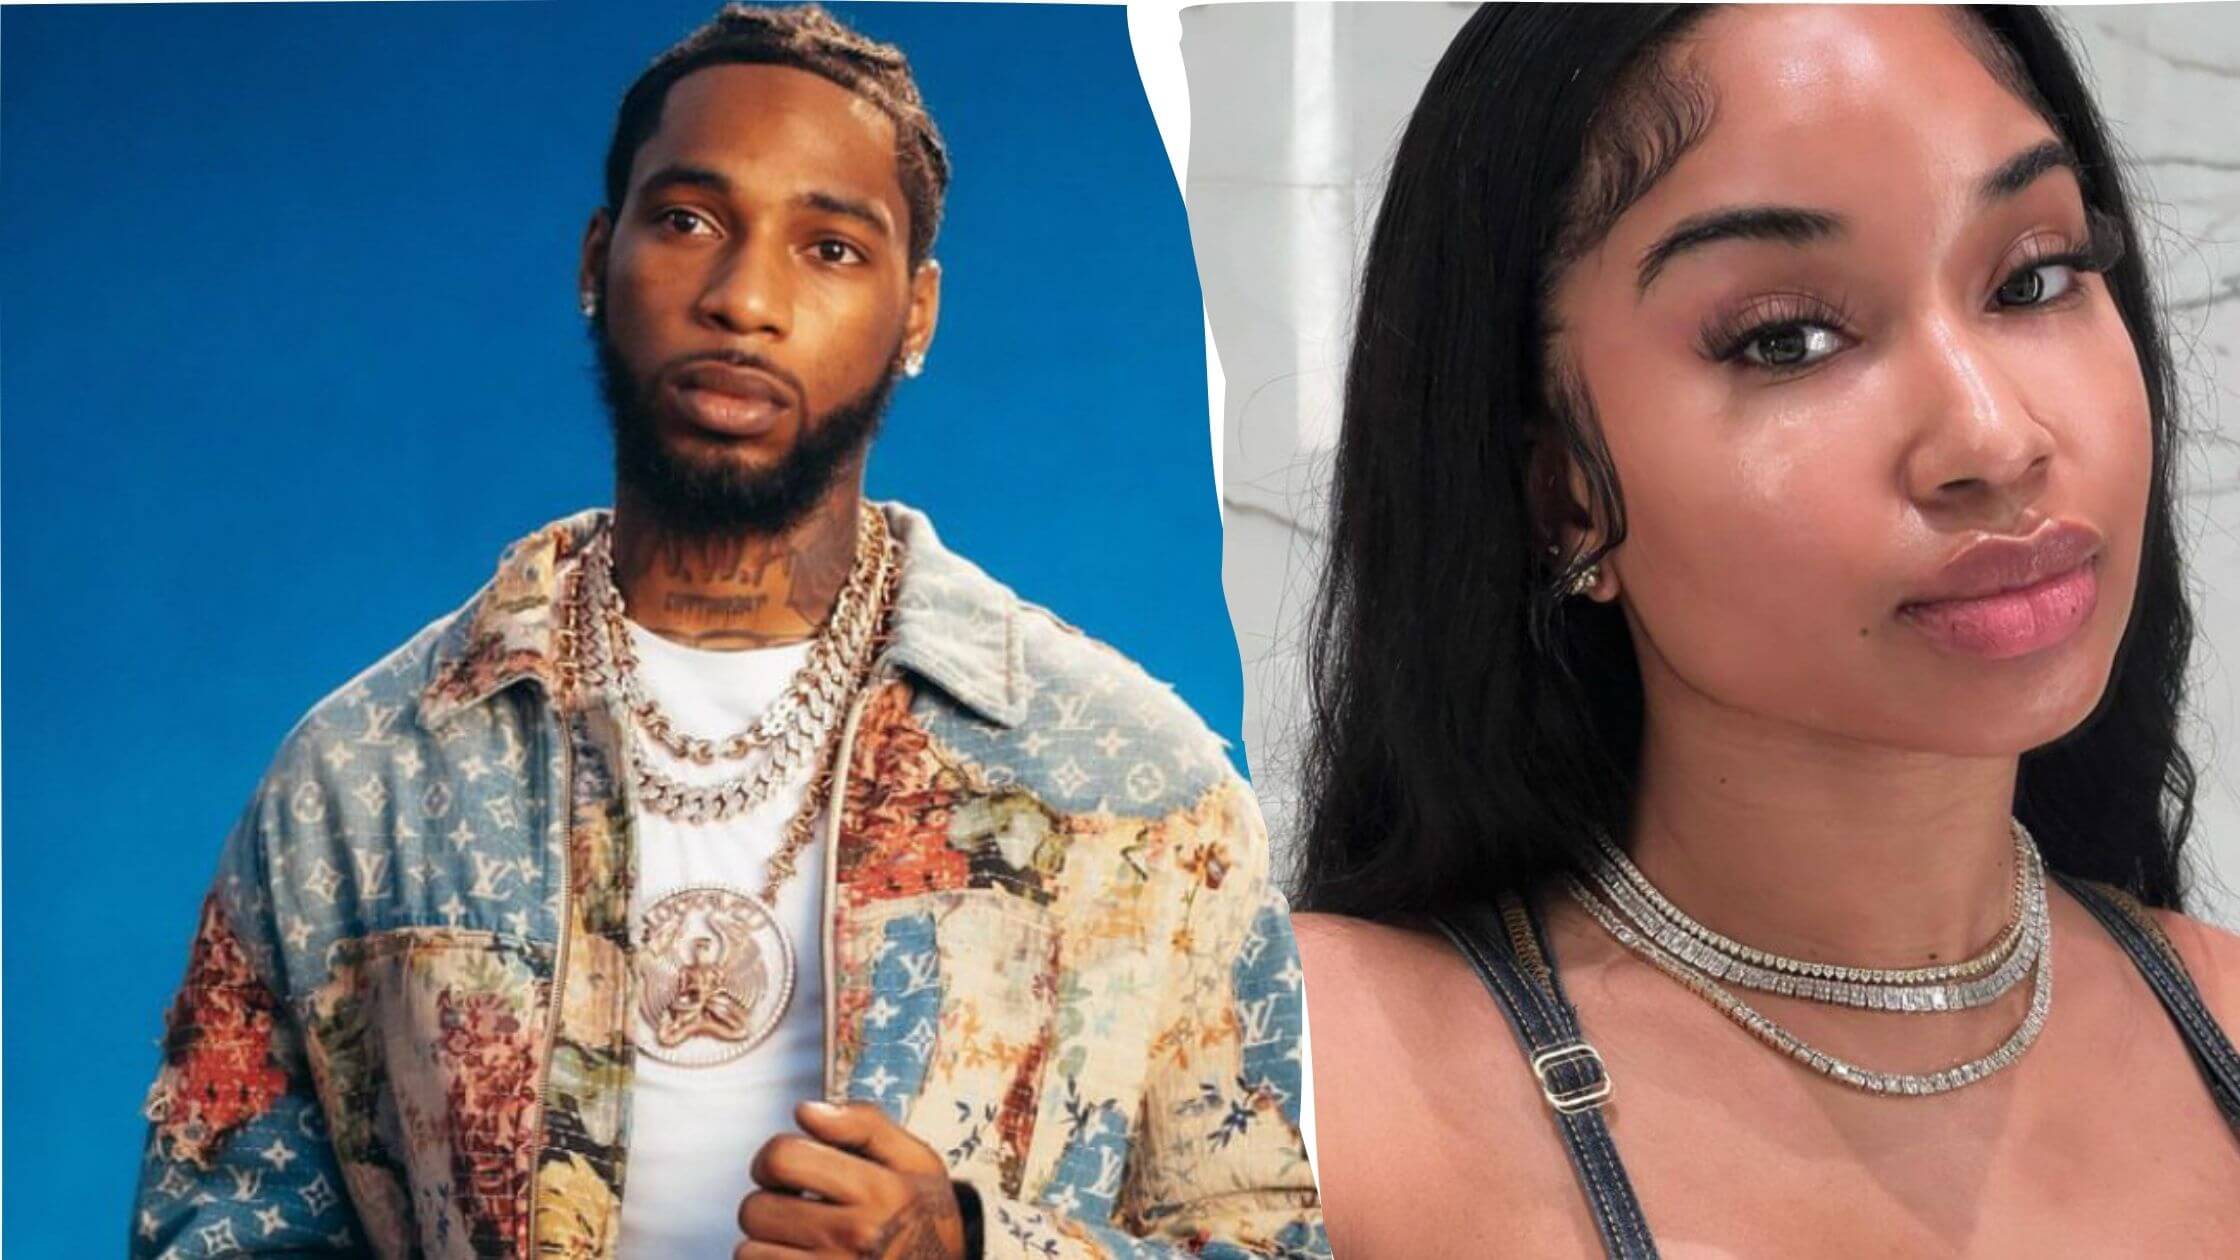 Key Glock is being accused of physical abuse by his girlfriend Karin Jinsui, who's a social media influencer